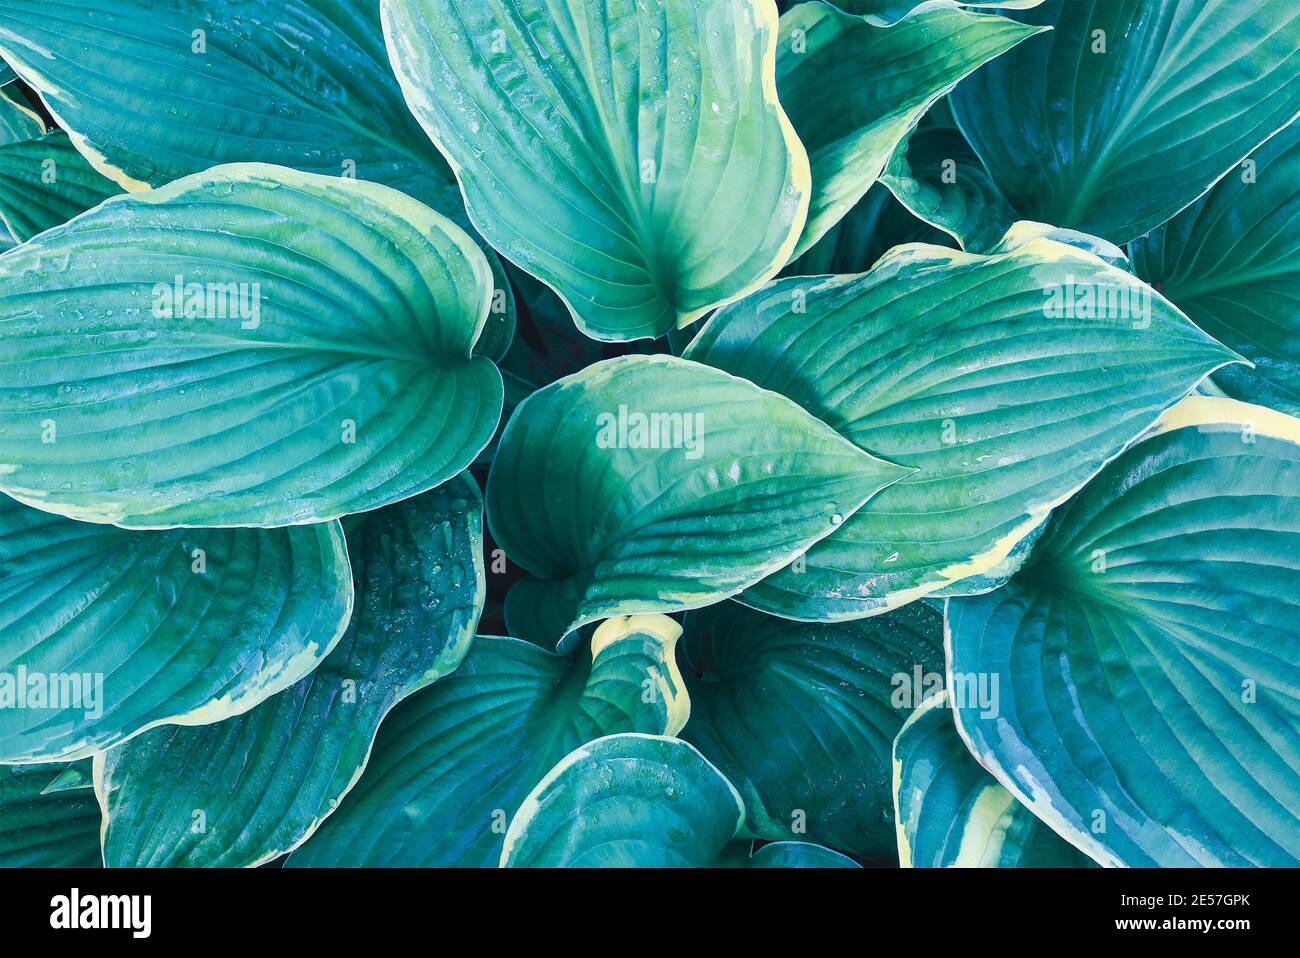 Overhead view of beautiful variegated blue Hosta. Image shot from top view. Stock Photo